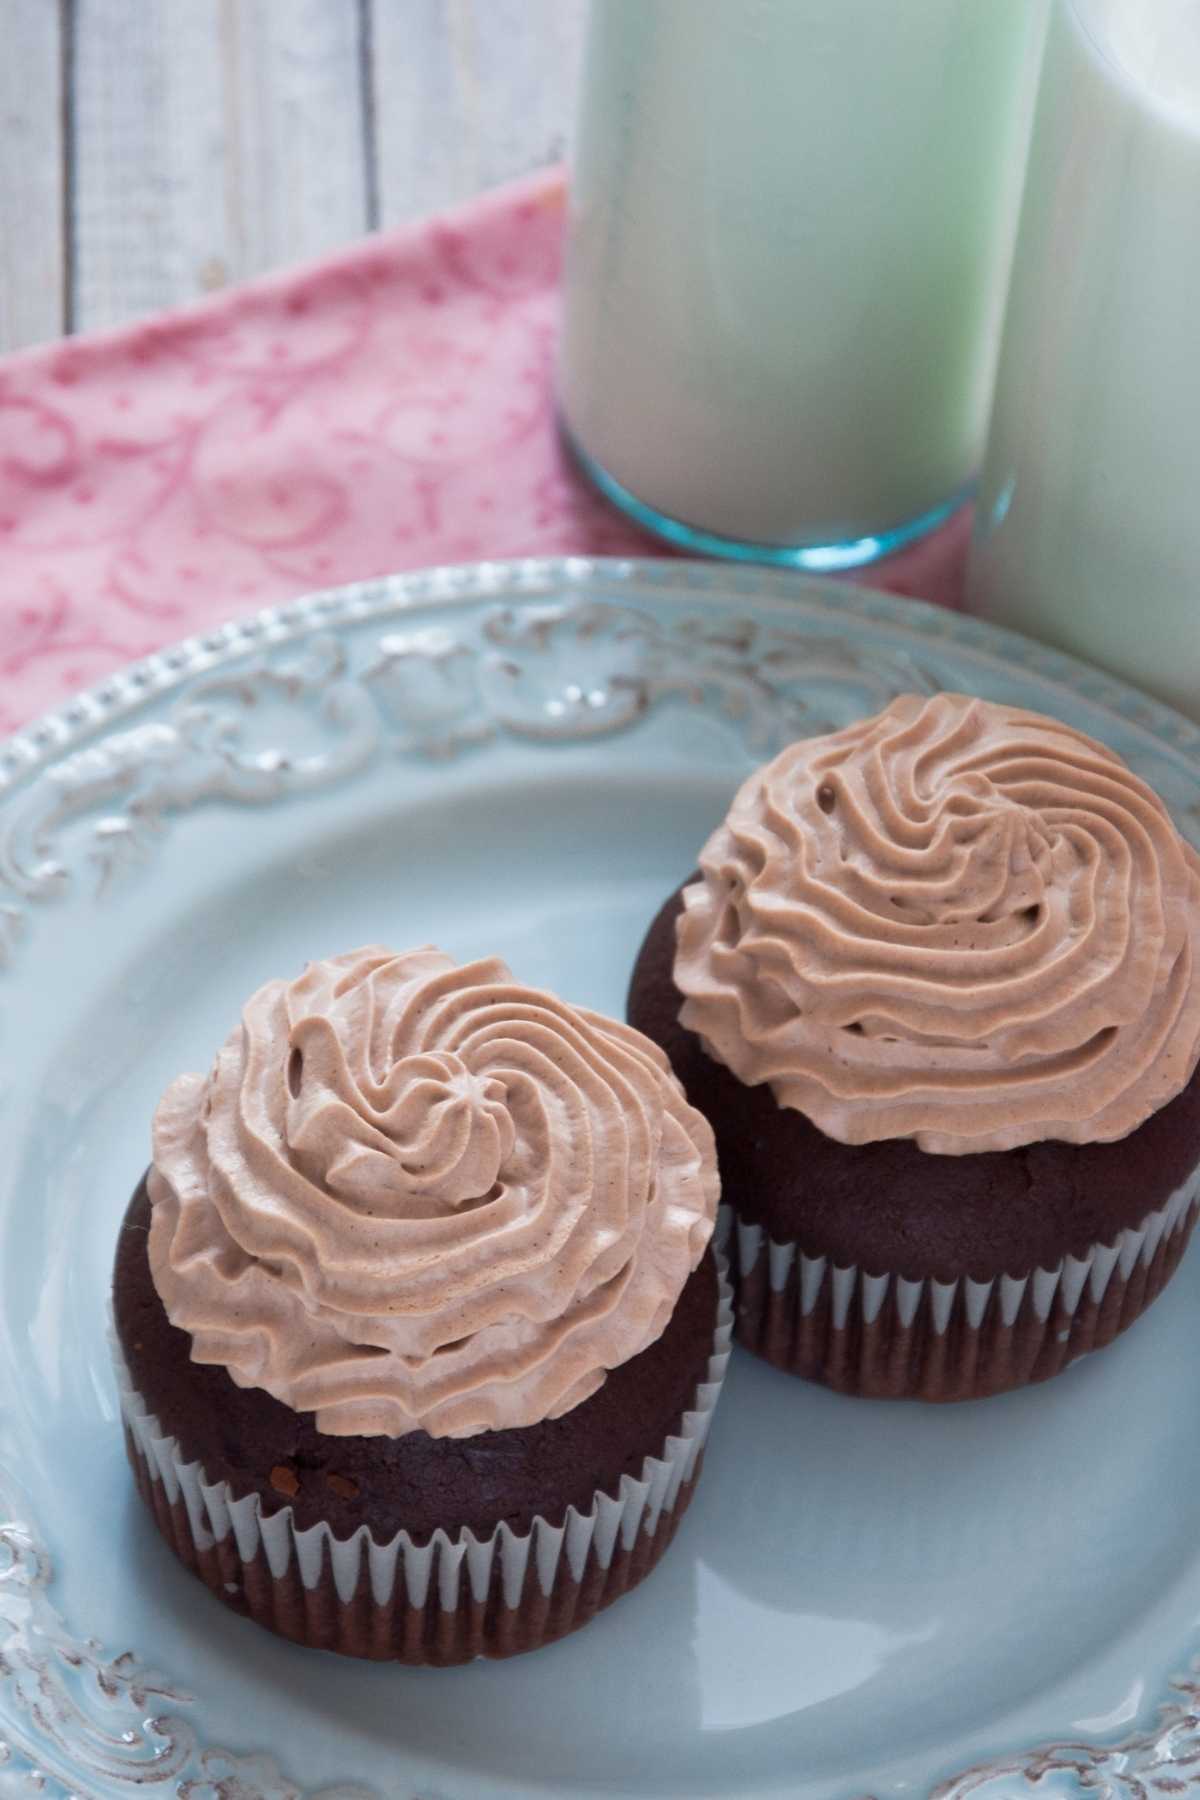 Made in just 5 minutes with only 4 simple ingredients, this chocolate cool whip recipe is going to be your new favorite dessert topping. Aside from the decadent taste that will satisfy your sweet tooth, this chocolate frosting is really easy to make. You can whip it up with ingredients you probably already have on hand.